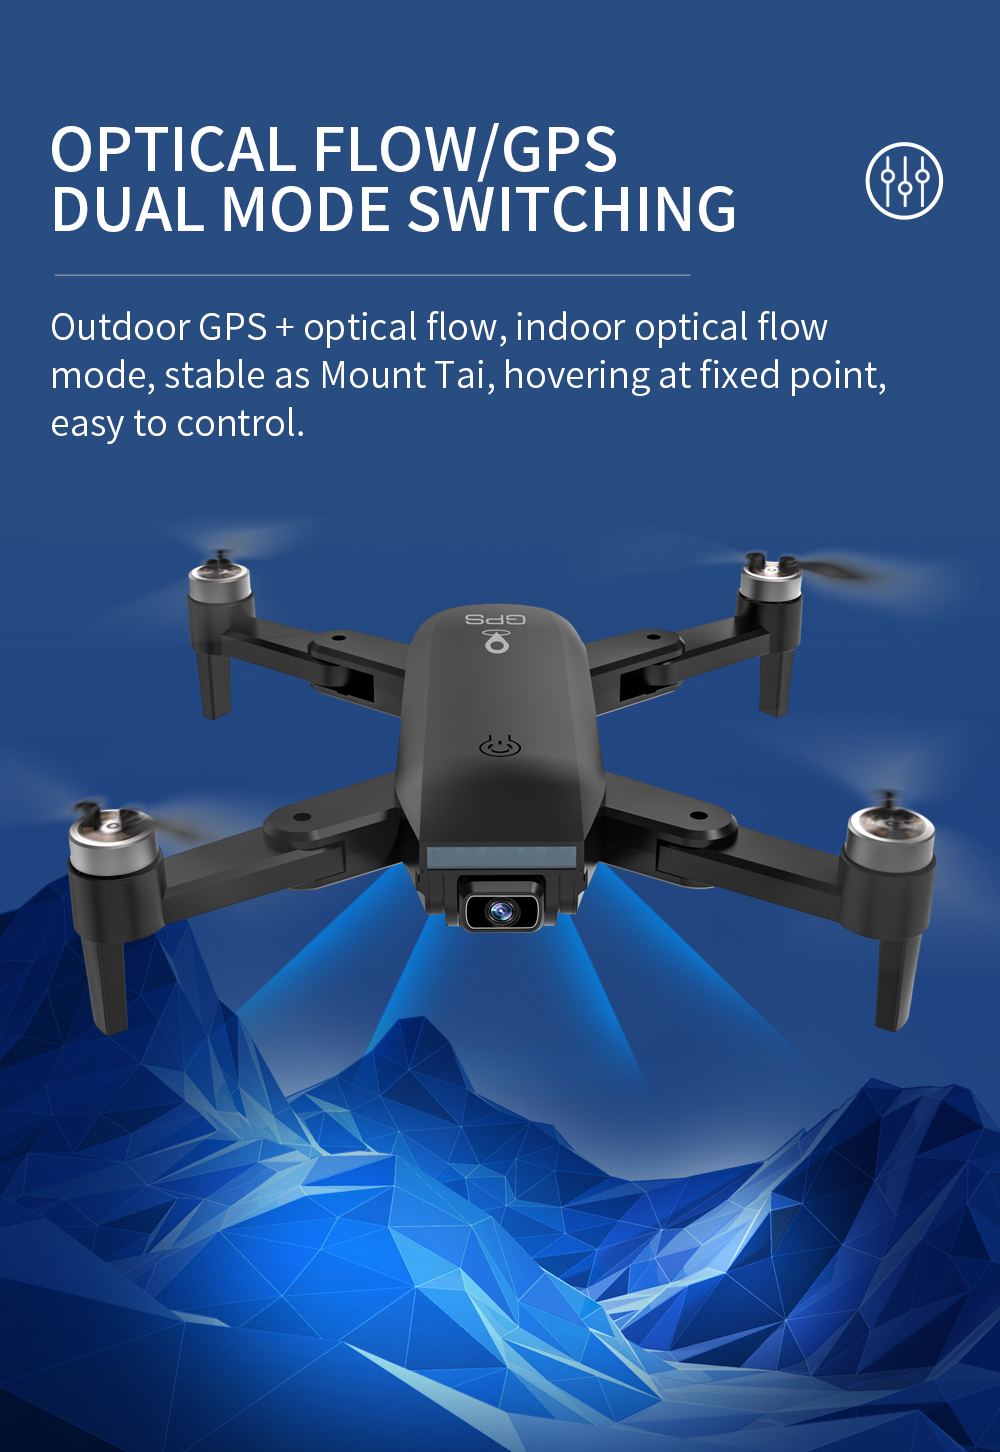 ZLL-SG700-MAX-5G-WIFI-FPV-GPS-with-4K-HD-Dual-Camera-22mins-Flight-Time-Optical-Flow-Positioning-Bru-1853047-10